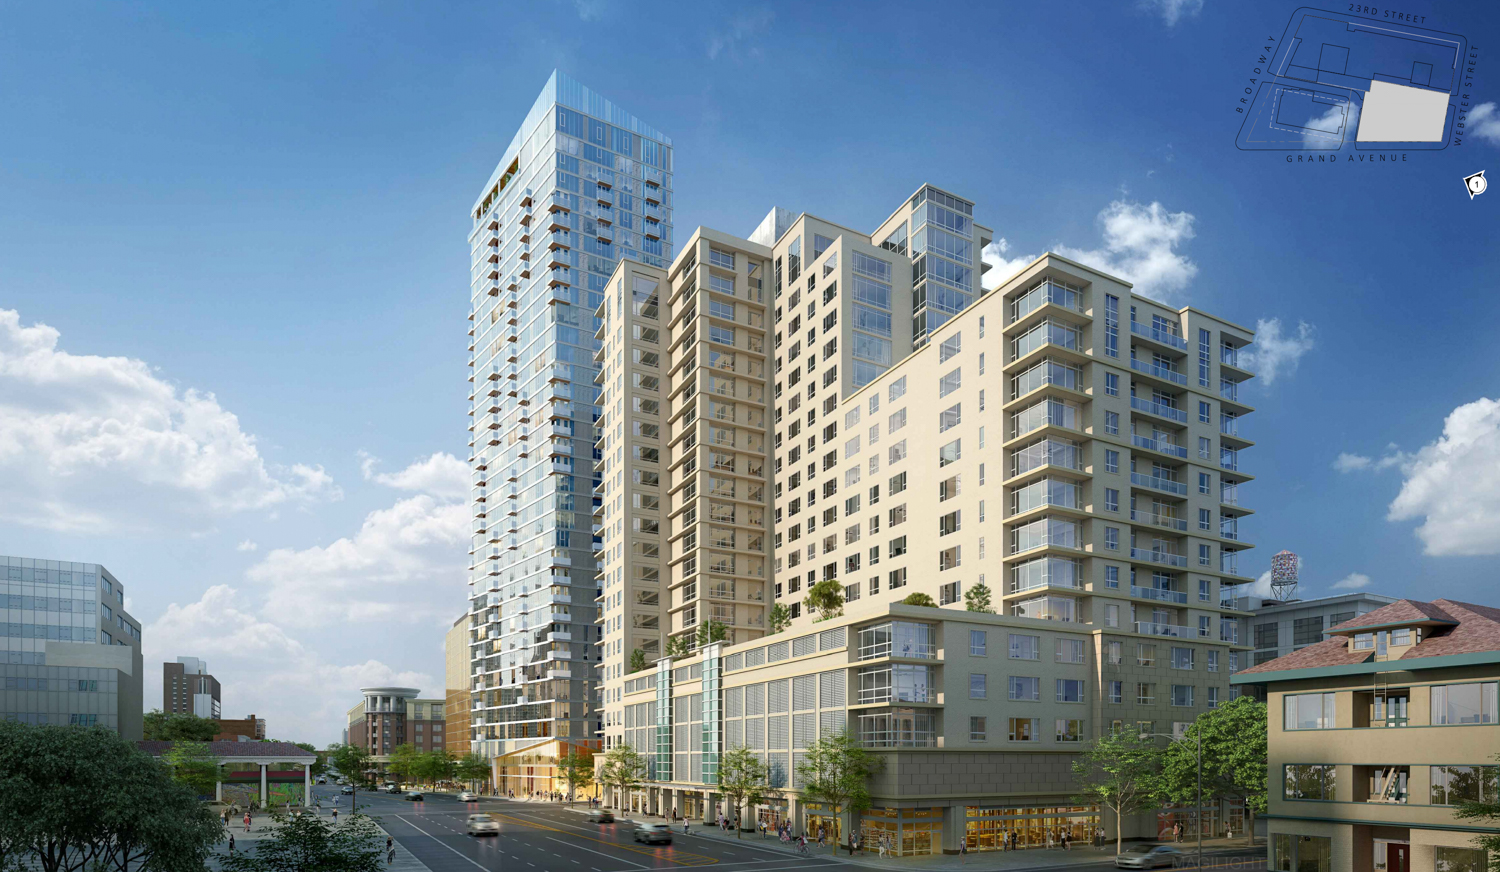 88 Grand Avenue viewed beside neighboring 100 Grand Avenue building, rendering by KTGY Architecture and Planning